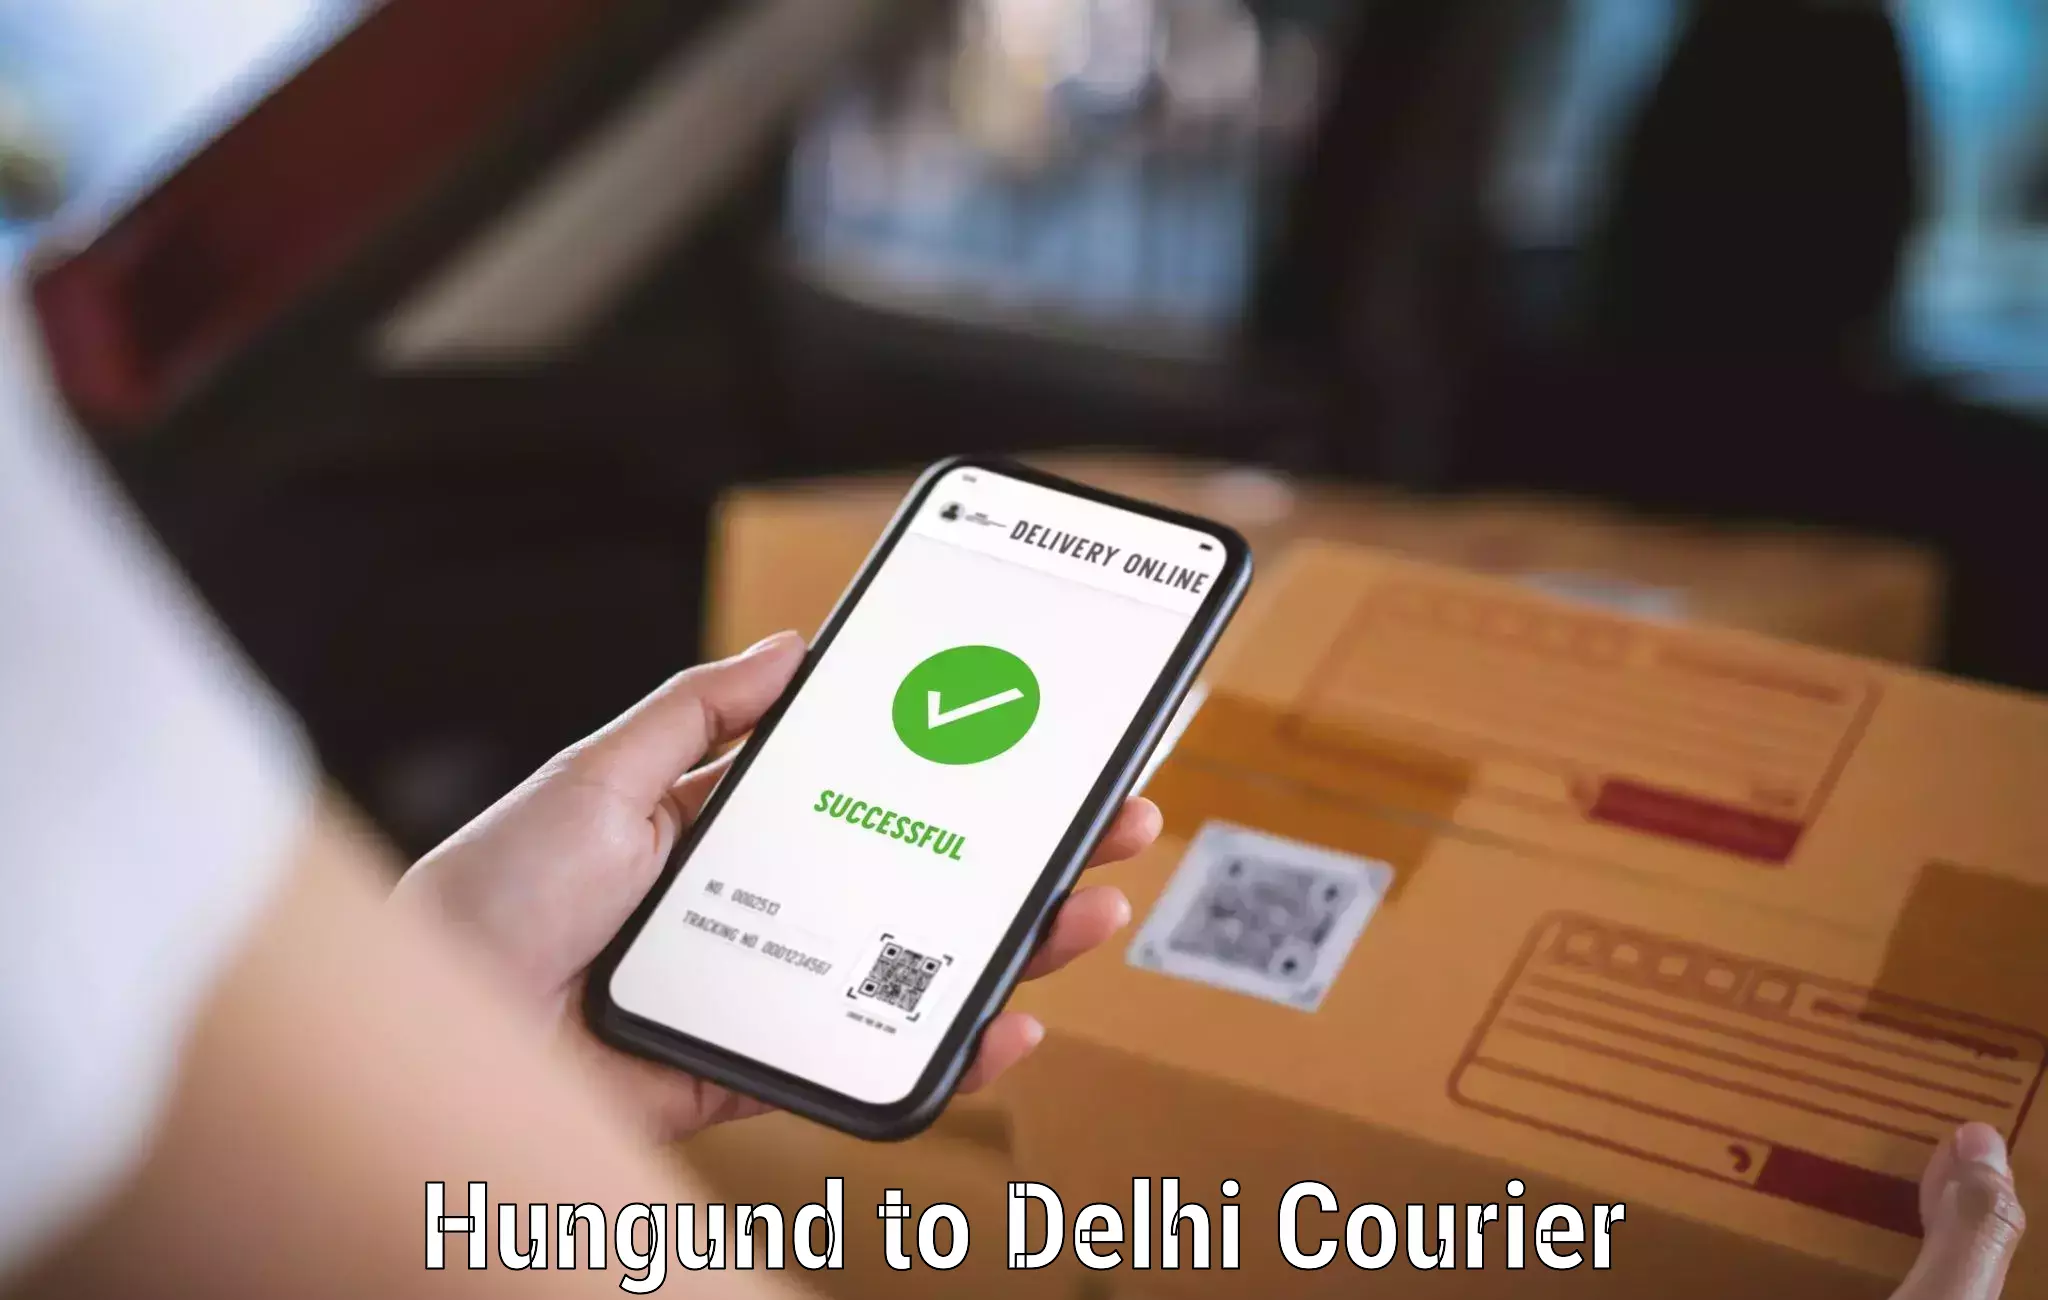 Holiday shipping services Hungund to University of Delhi